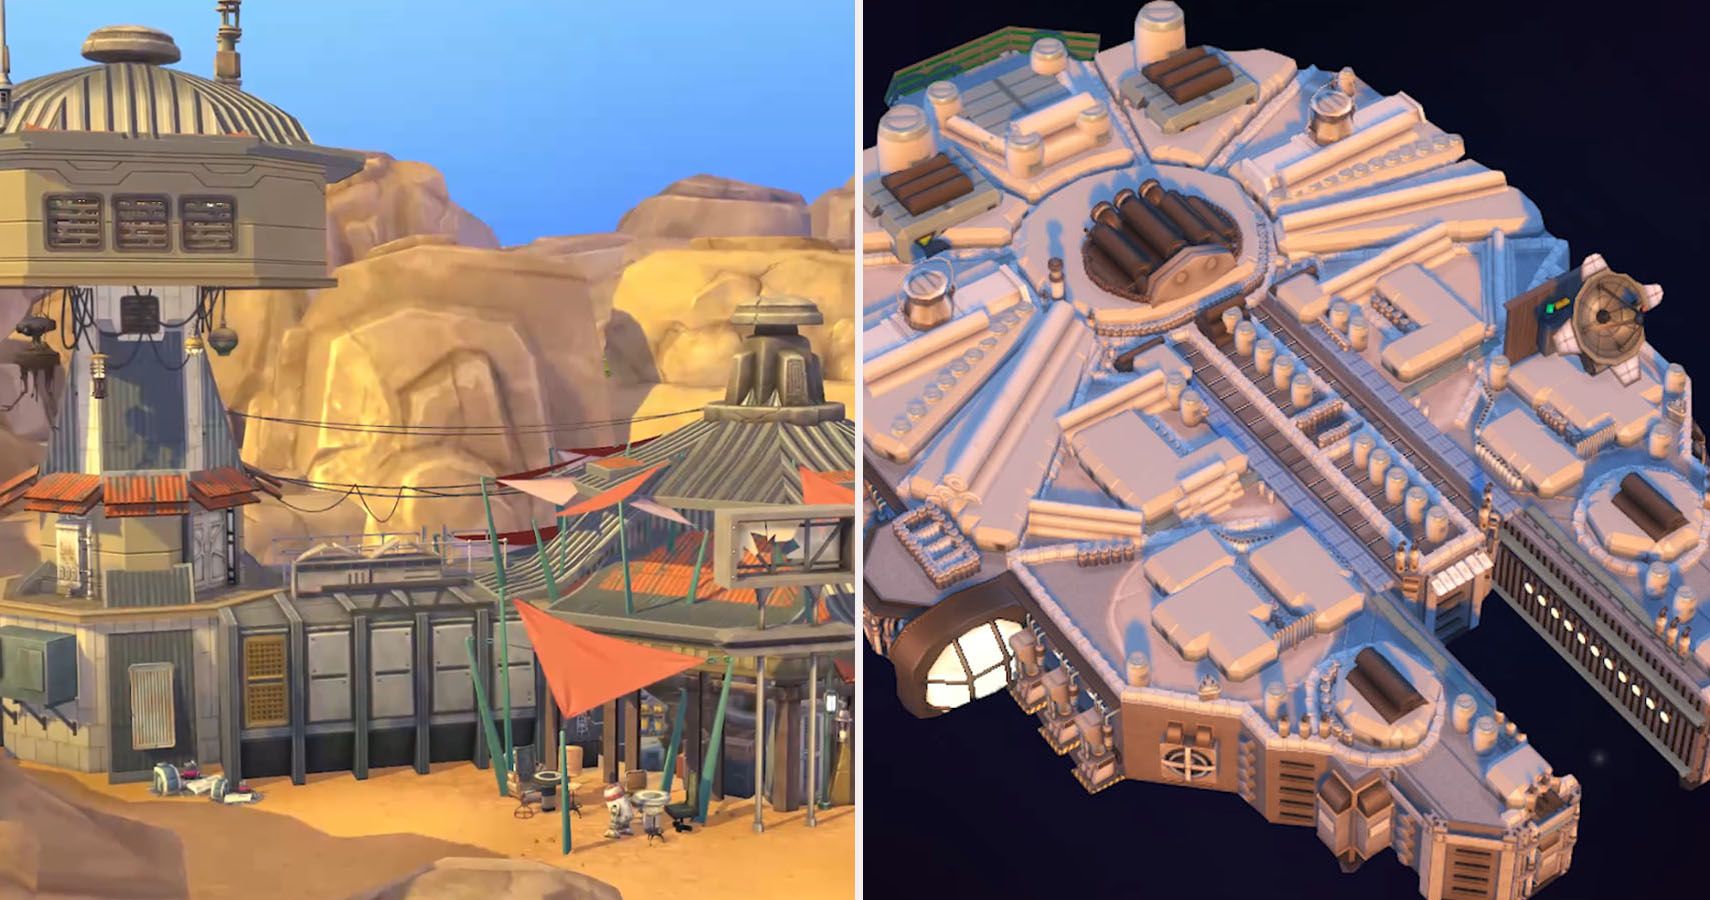 the-sims-4-5-star-wars-builds-that-came-before-journey-to-batuu-5-that-came-afterwards